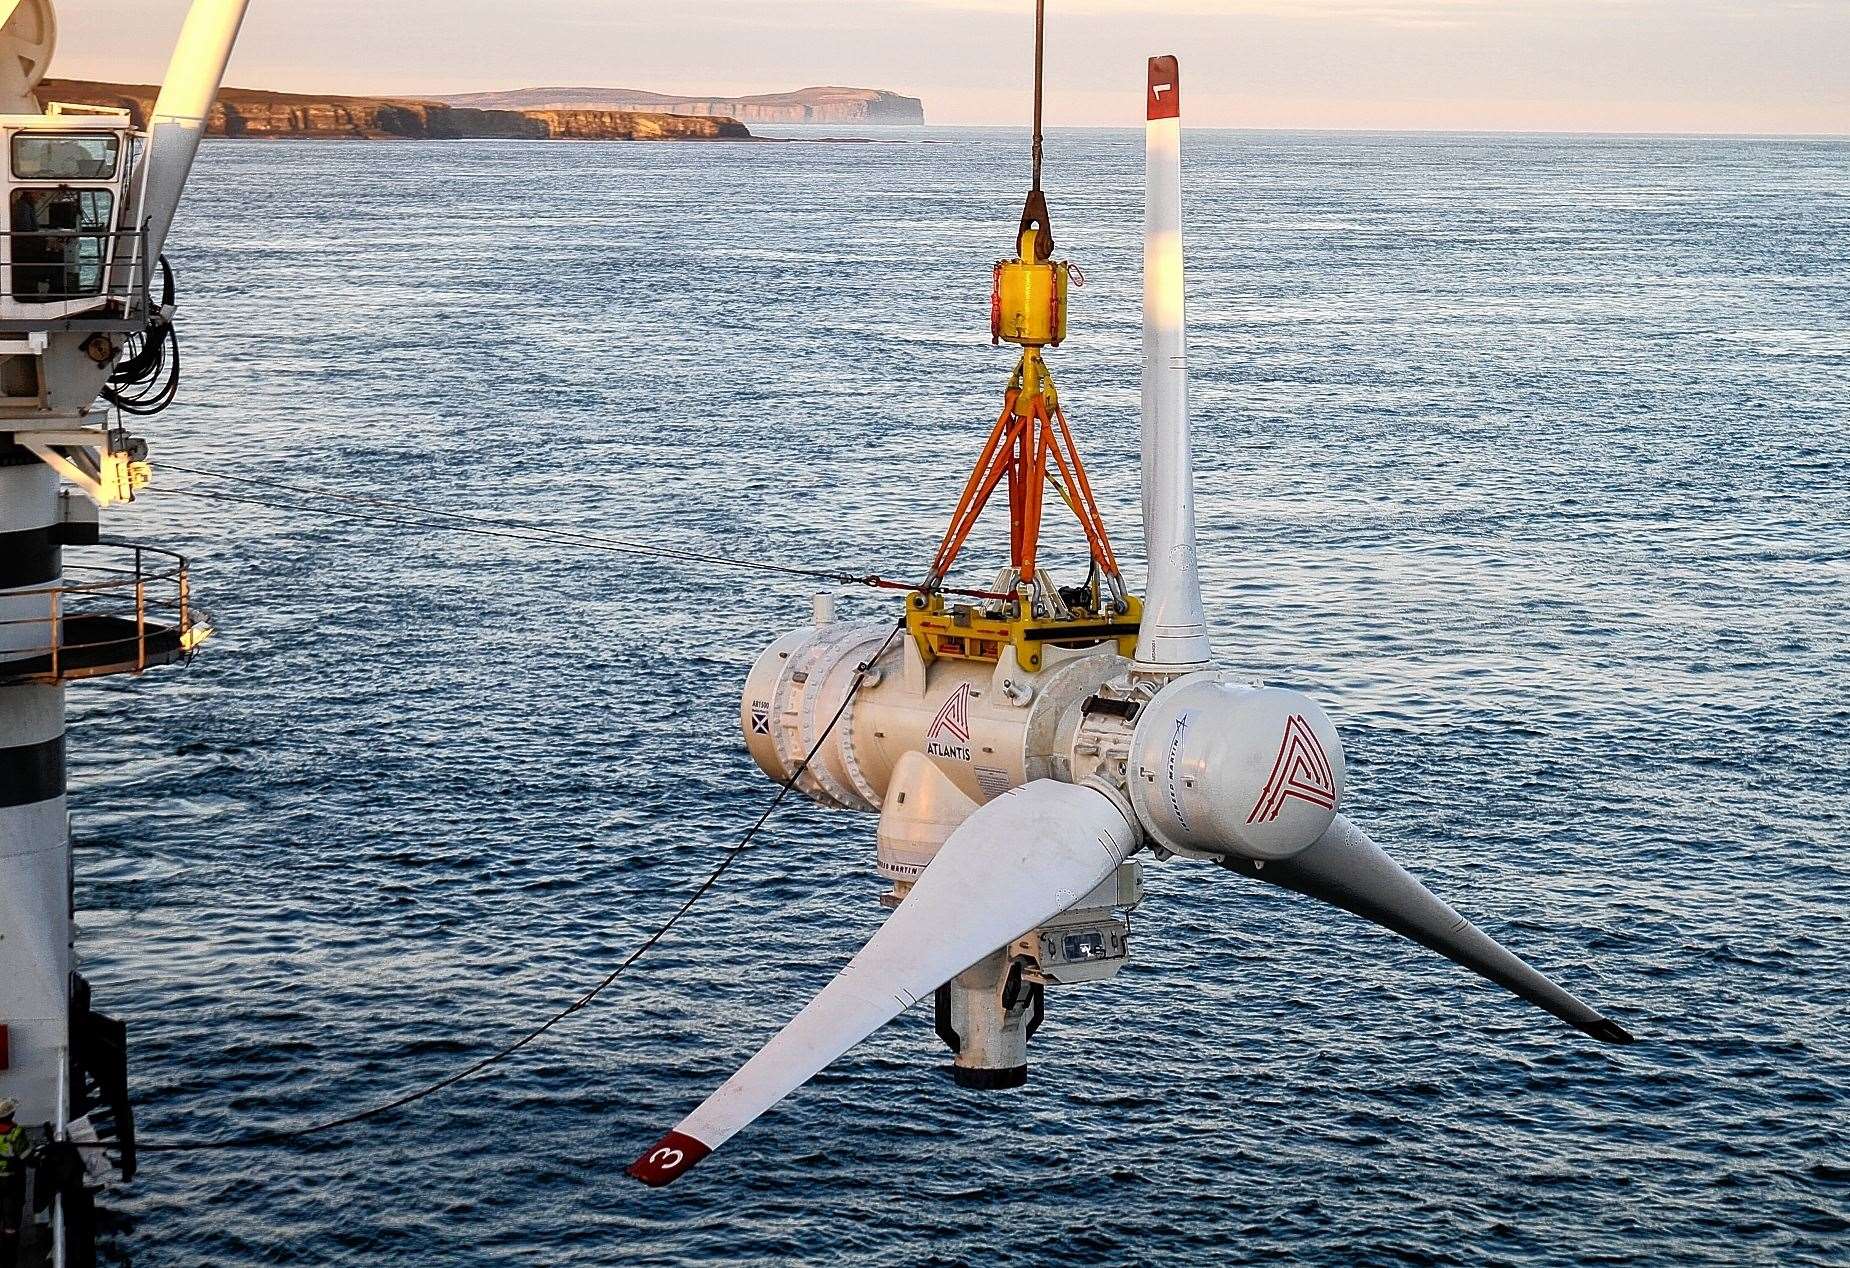 The new deal will help the MeyGen project in the Pentland Firth